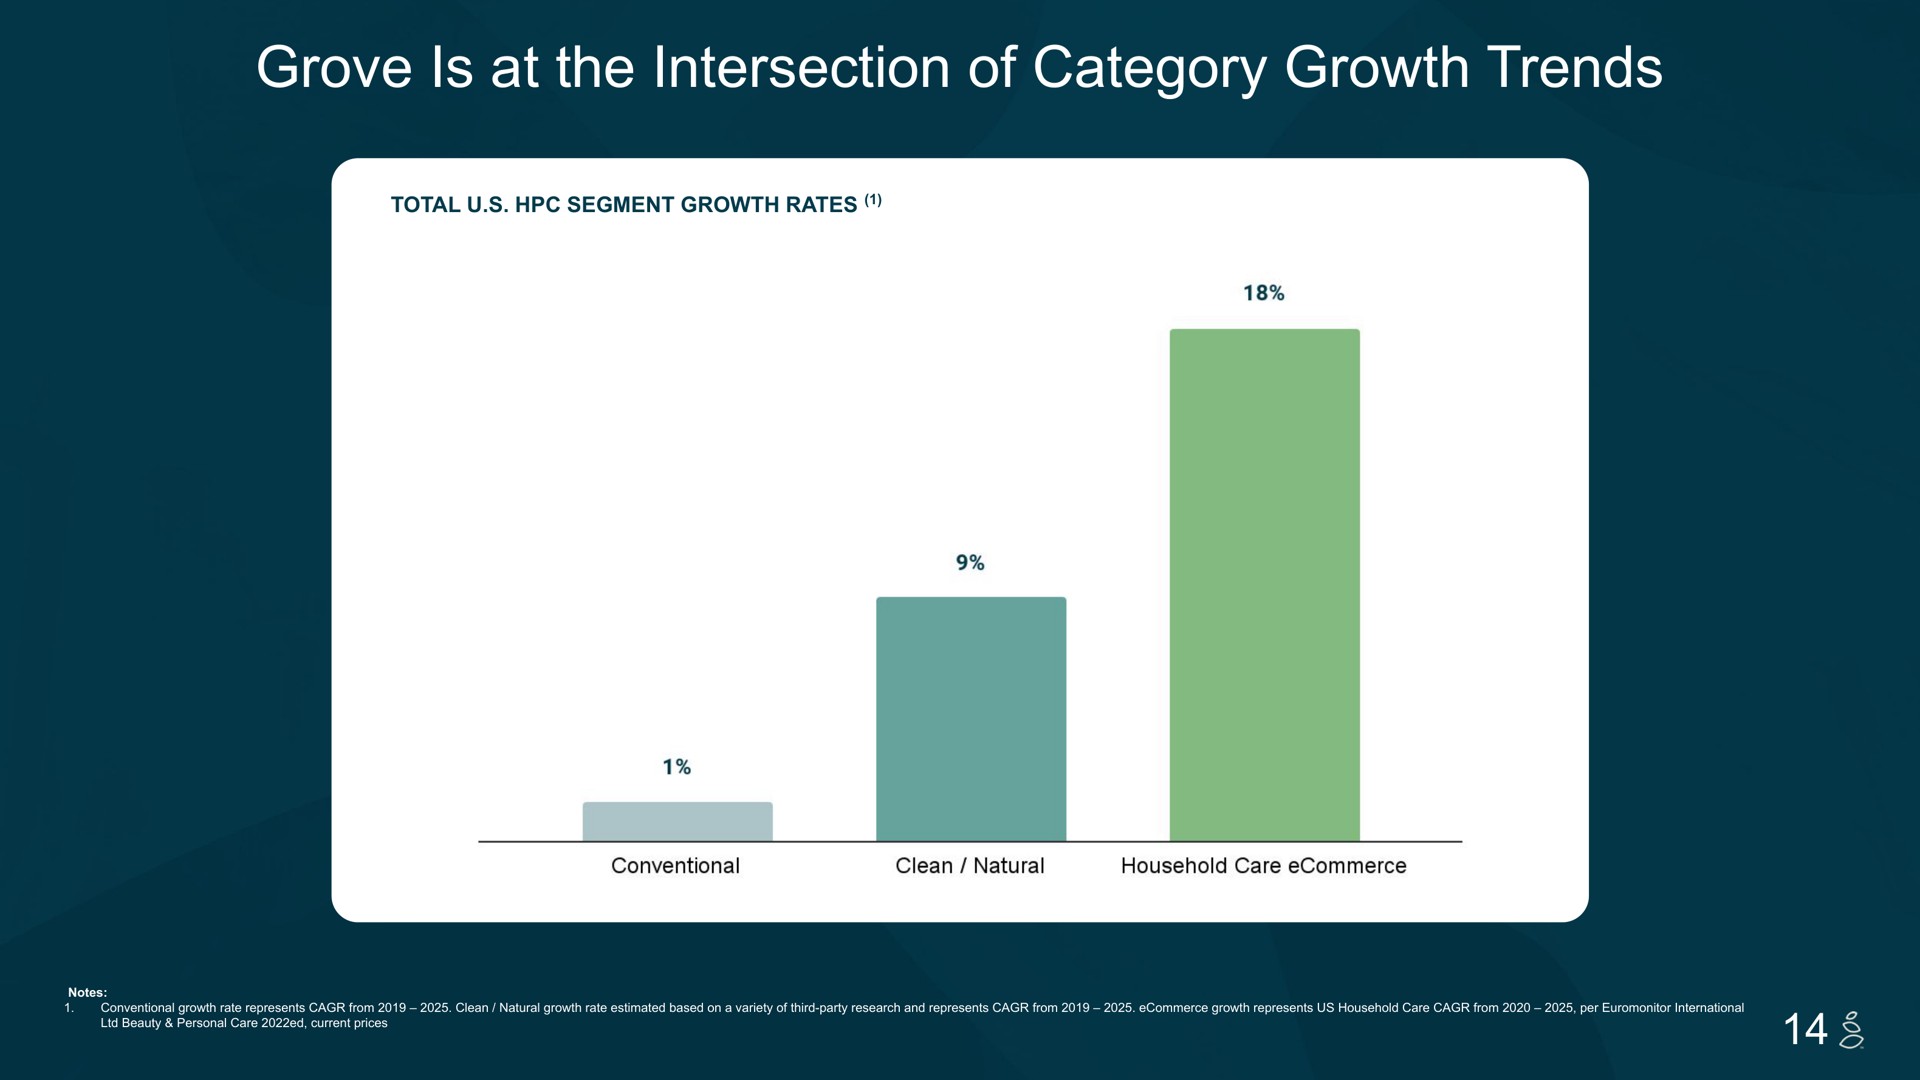 grove is at the intersection of category growth trends | Grove